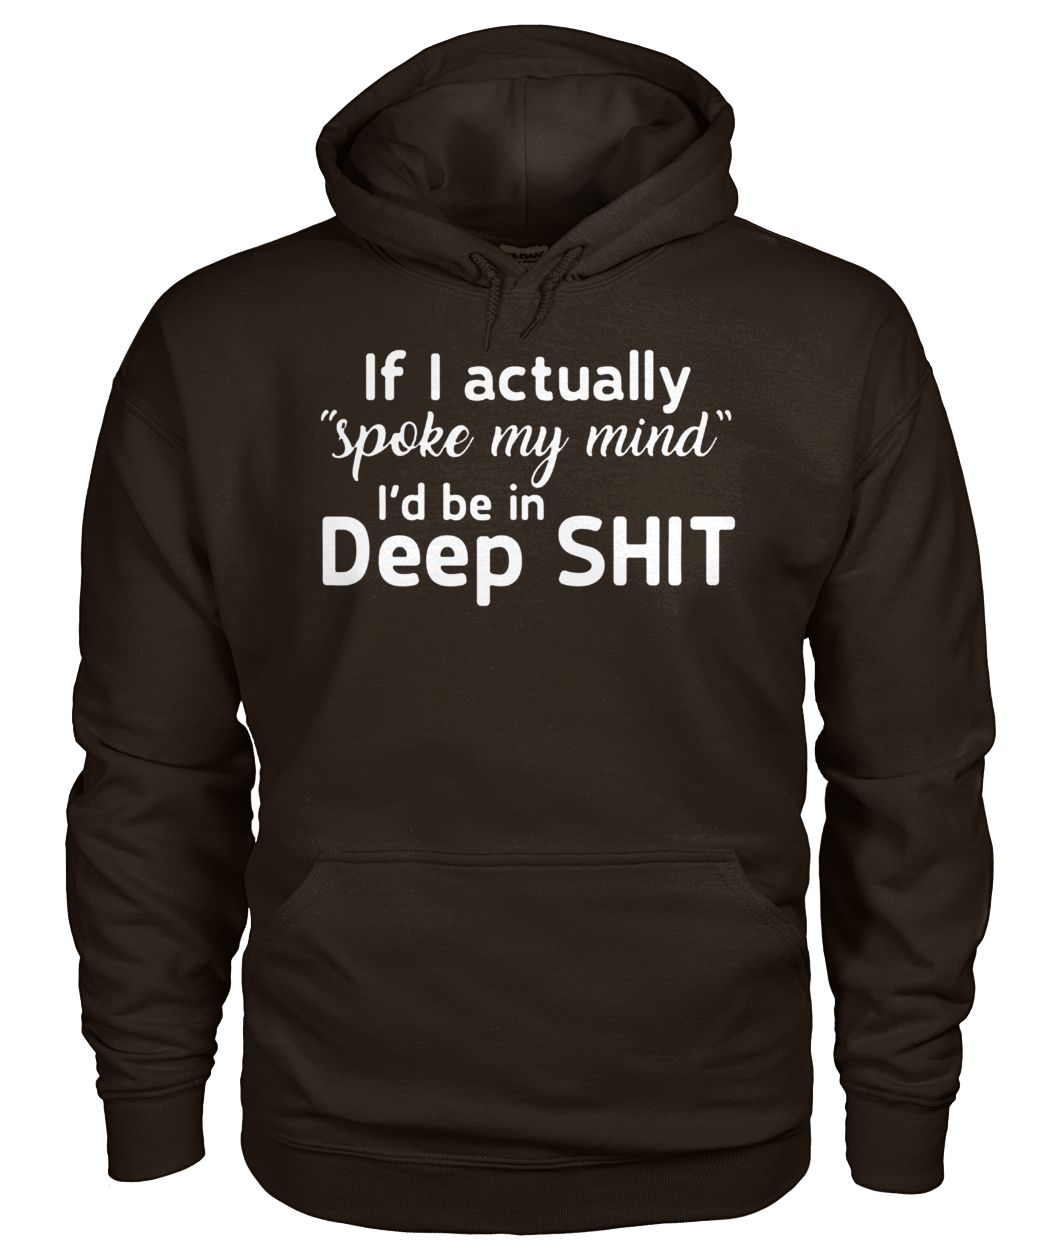 If I actually spoke my mind I'd be in deep shit gildan hoodie